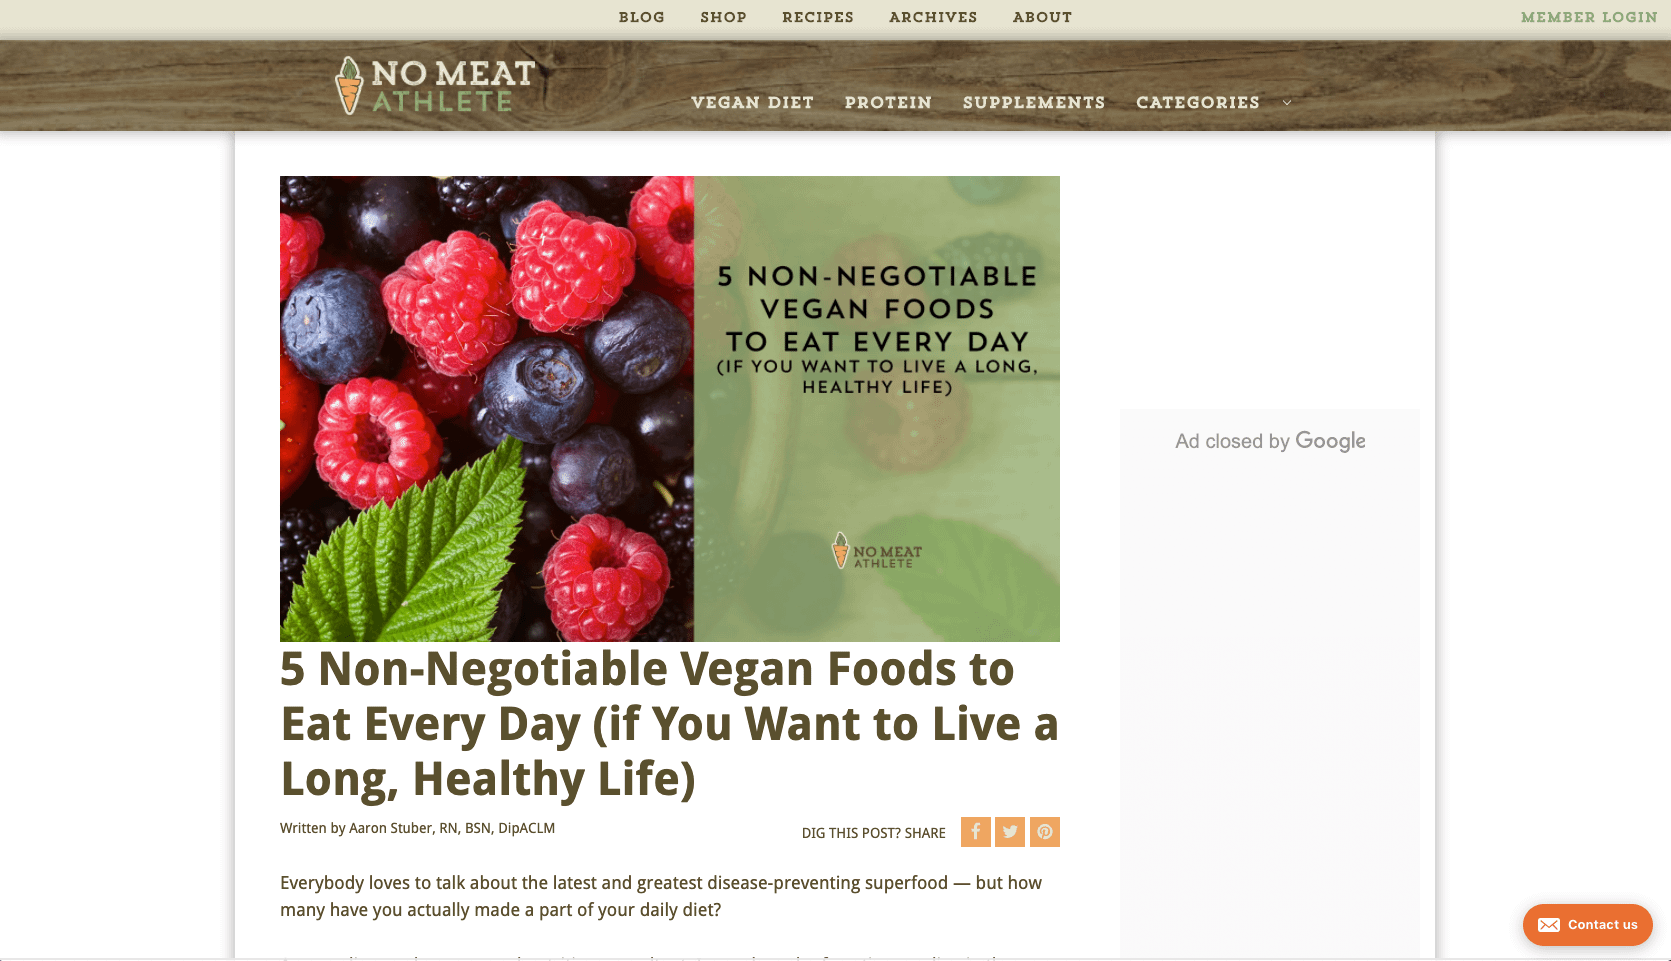 Non Negotiable Vegan Foods to Eat Every Day if You Want to Live a Long Healthy Life